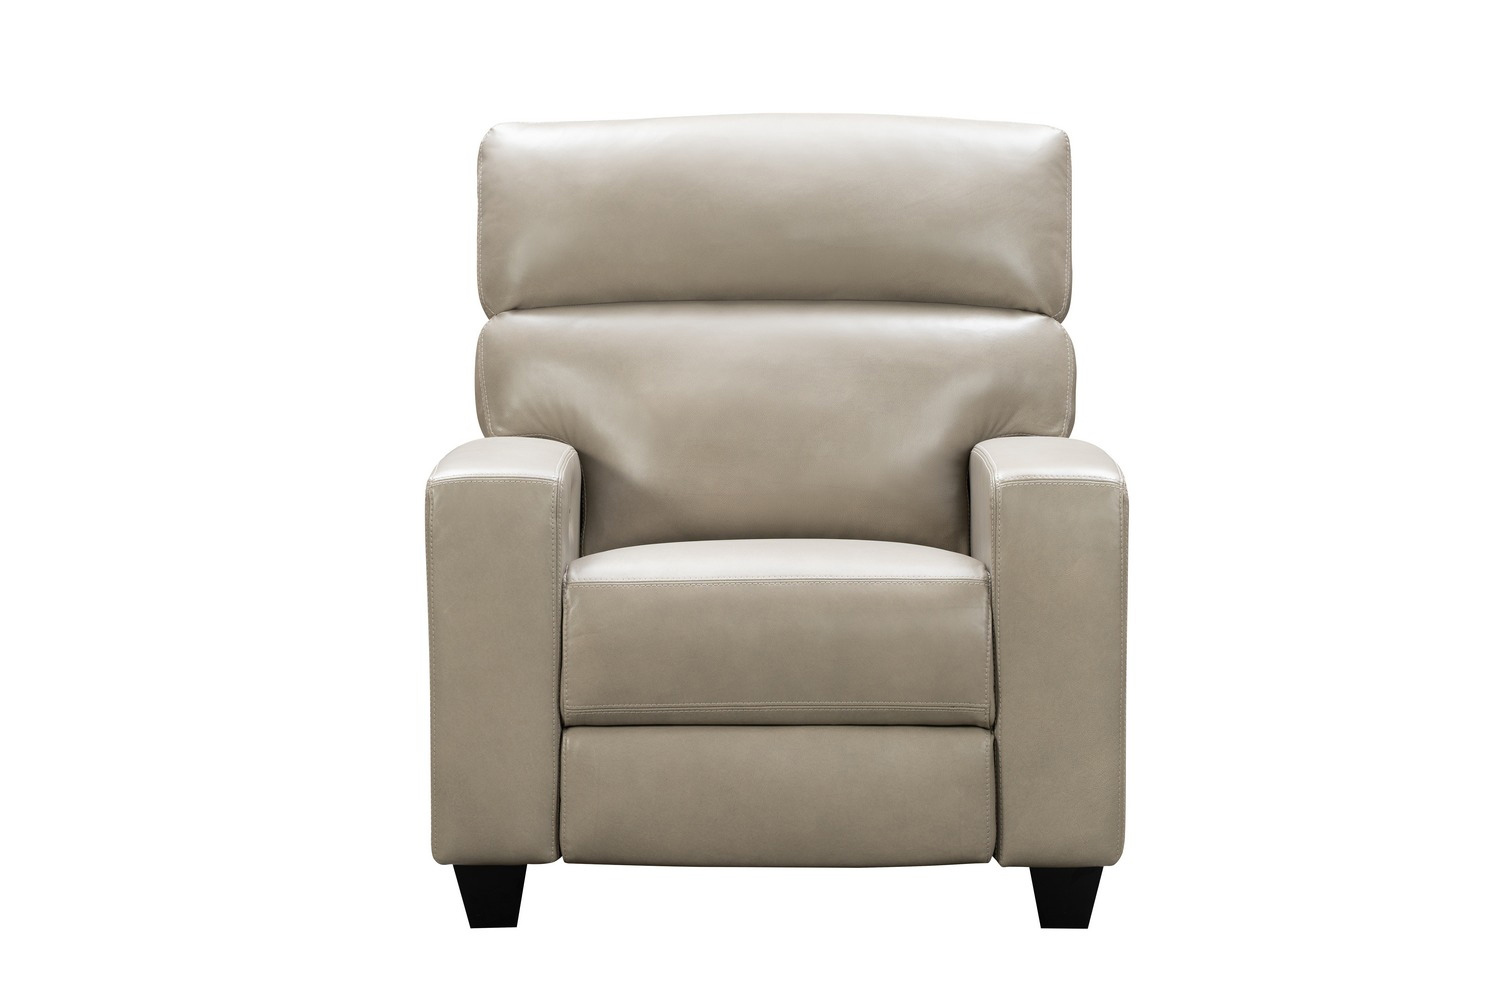 Barcalounger Marcello Power Recliner Chair with Power Head Rest and Power Lumbar - Sergi Gray Beige/Leather Match